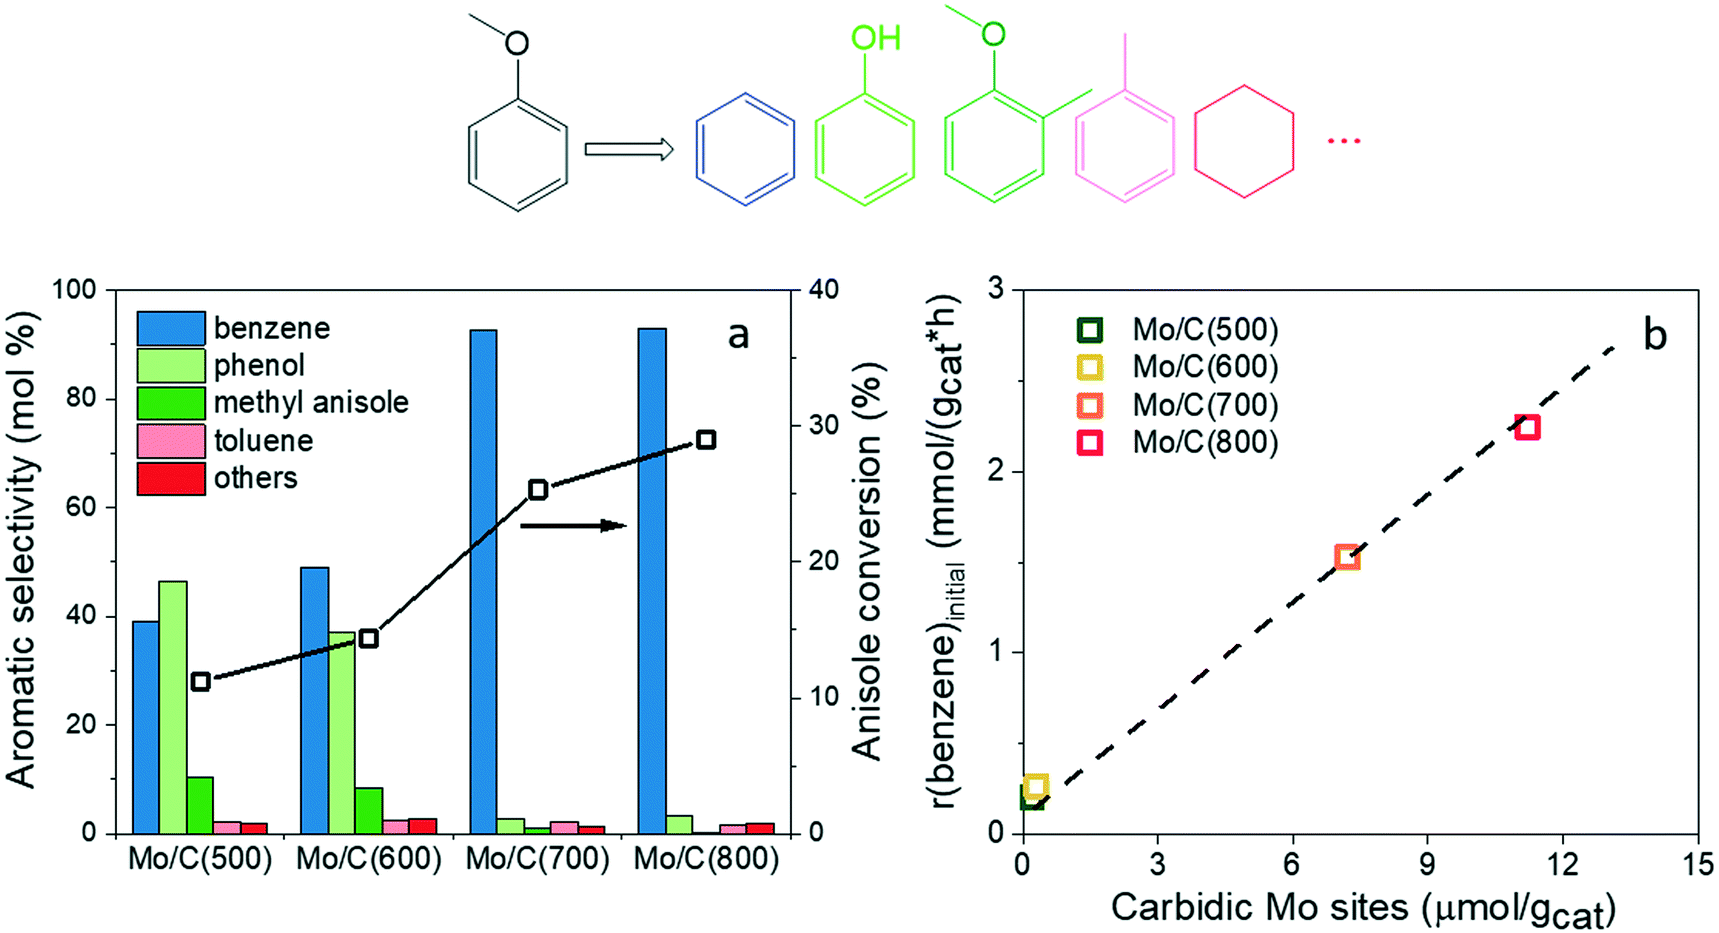 Tuning The Reactivity Of Molybdenum Oxy Carbide Catalysts By The Carburization Degree Co2 Reduction And Anisole Hydrodeoxygenation Catalysis Science Technology Rsc Publishing